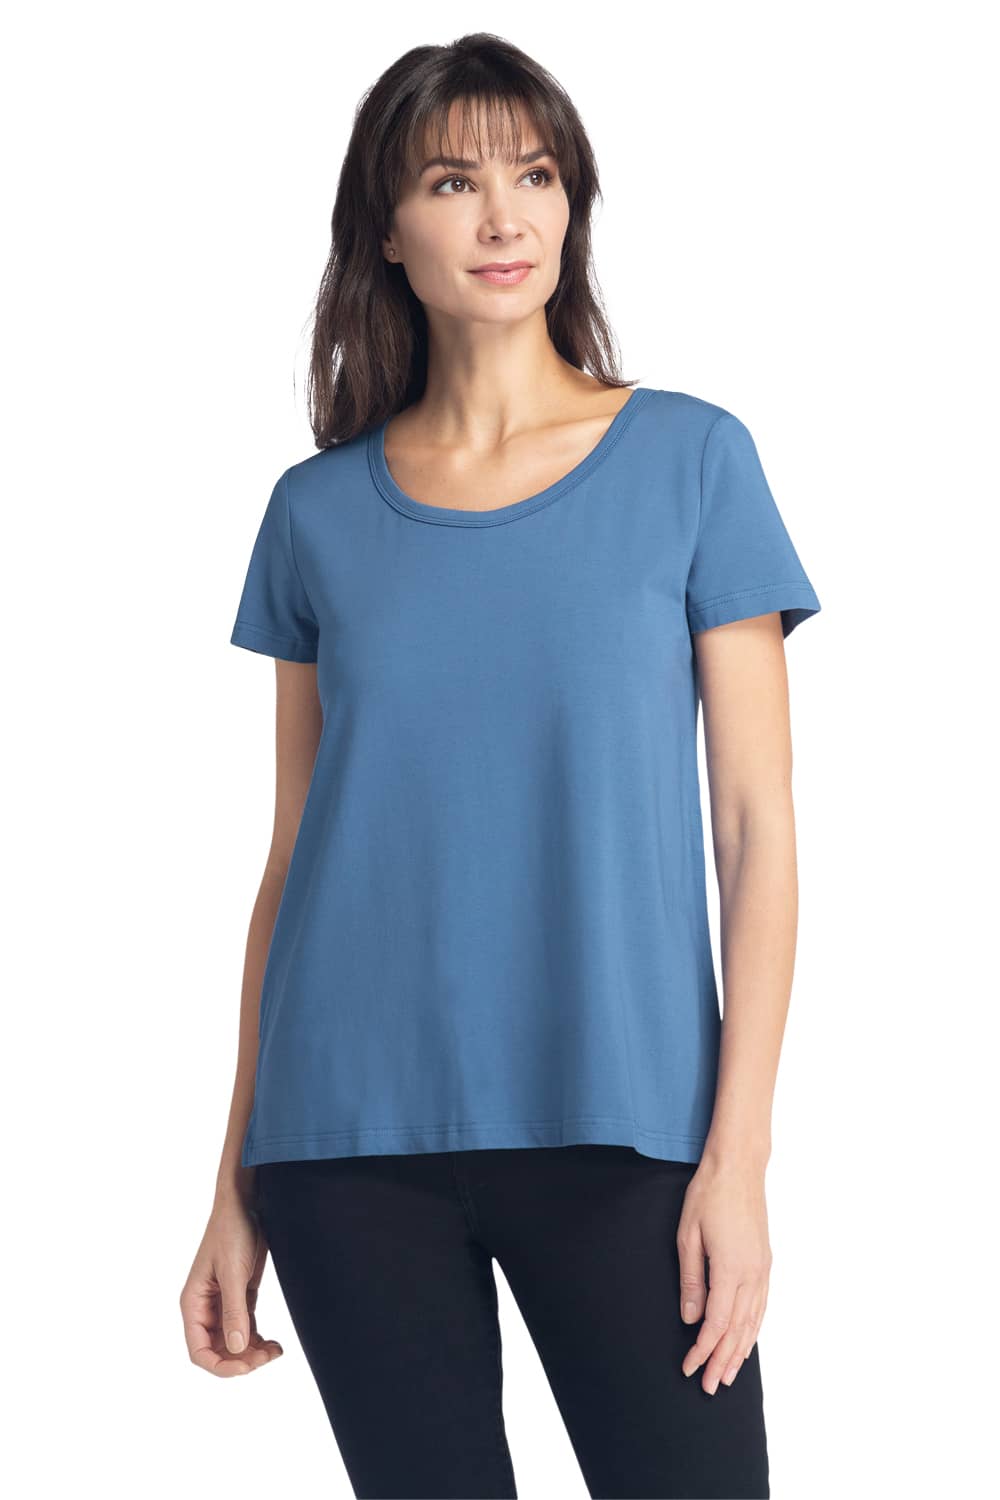  Fishers Finery V Neck Tee Shirt For Women - Sustainable  Earth Conscious Clothing